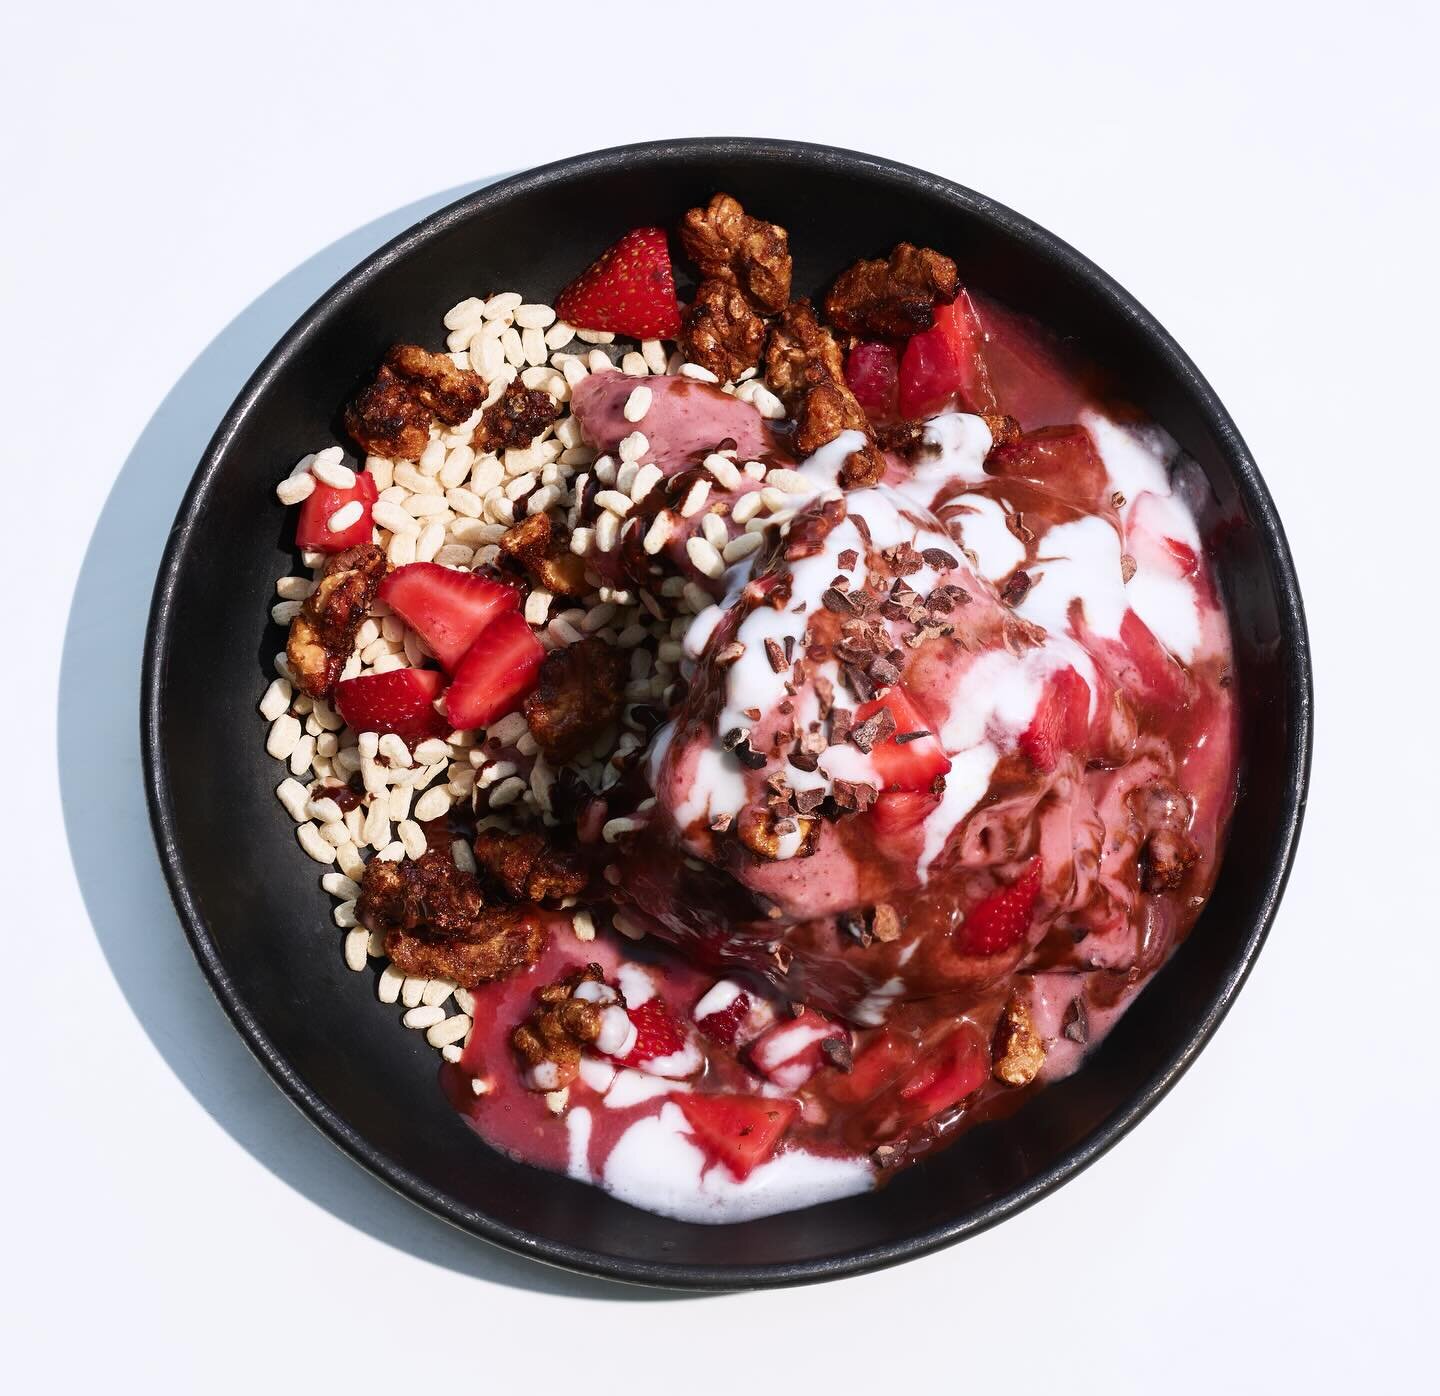 To pair with your latte, @southernsqueeze smoothie bowl.